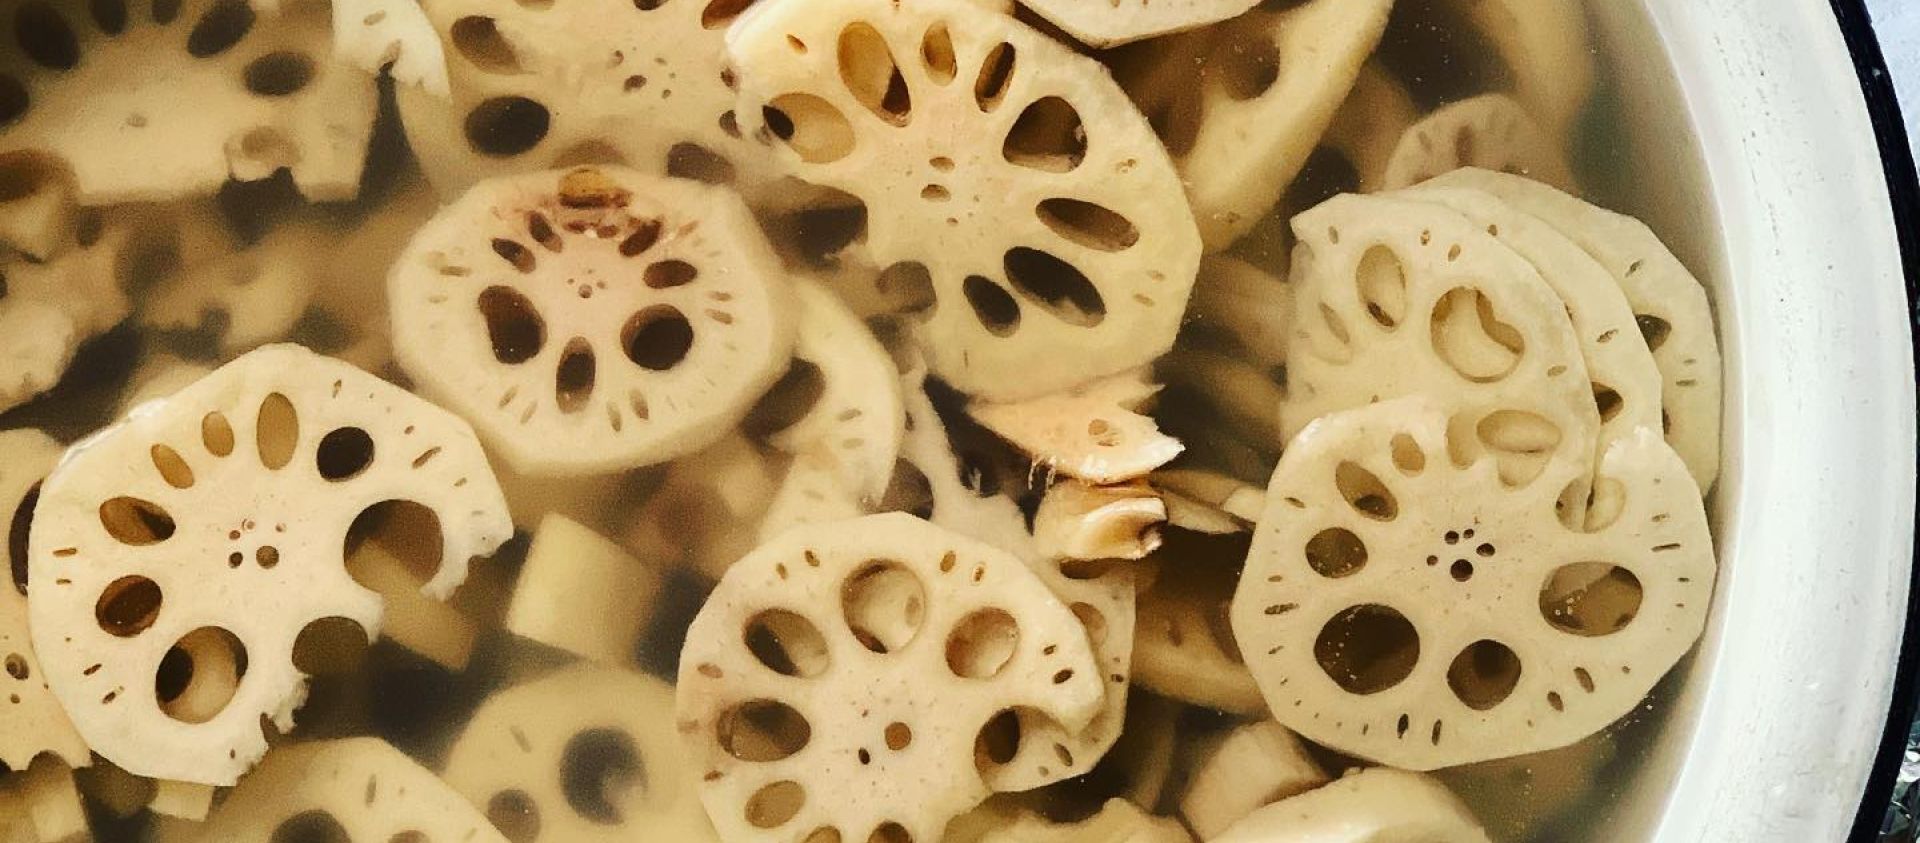 Wild Lotus Root or Yonkapin | The wild lotus root or yonkapin grows in shallow ponds and along the edges of streams. The root is sweet and delicious when raw or cooked. 